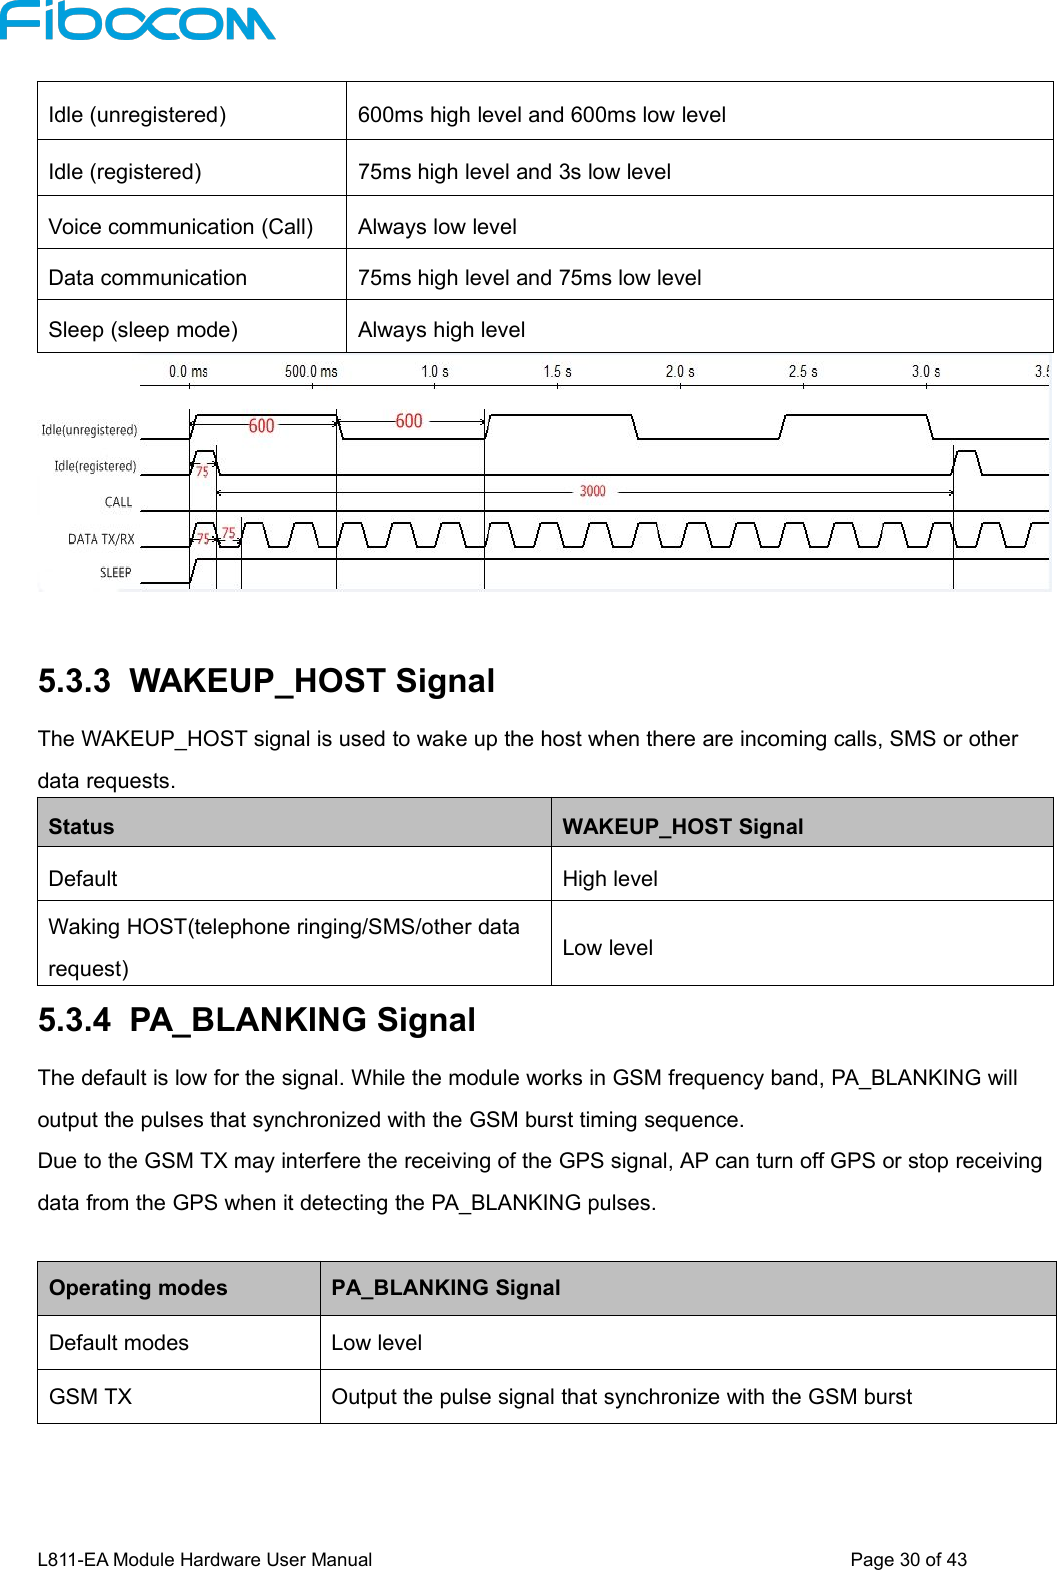 L811-EA Module Hardware User Manual Page30of43Idle (unregistered)600ms high level and 600ms low levelIdle (registered)75ms high level and 3s low levelVoice communication (Call)Always low levelData communication75ms high level and 75ms low levelSleep (sleep mode)Always high level5.3.3 WAKEUP_HOST SignalThe WAKEUP_HOST signal is used to wake up the host when there are incoming calls, SMS or otherdata requests.StatusWAKEUP_HOST SignalDefaultHigh levelWaking HOST(telephone ringing/SMS/other datarequest)Low level5.3.4 PA_BLANKING SignalThe default is low for the signal. While the module works in GSM frequency band, PA_BLANKING willoutput the pulses that synchronized with the GSM burst timing sequence.Due to the GSM TX may interfere the receiving of the GPS signal, AP can turn off GPS or stop receivingdata from the GPS when it detecting the PA_BLANKING pulses.Operating modesPA_BLANKING SignalDefault modesLow levelGSM TXOutput the pulse signal that synchronize with the GSM burst